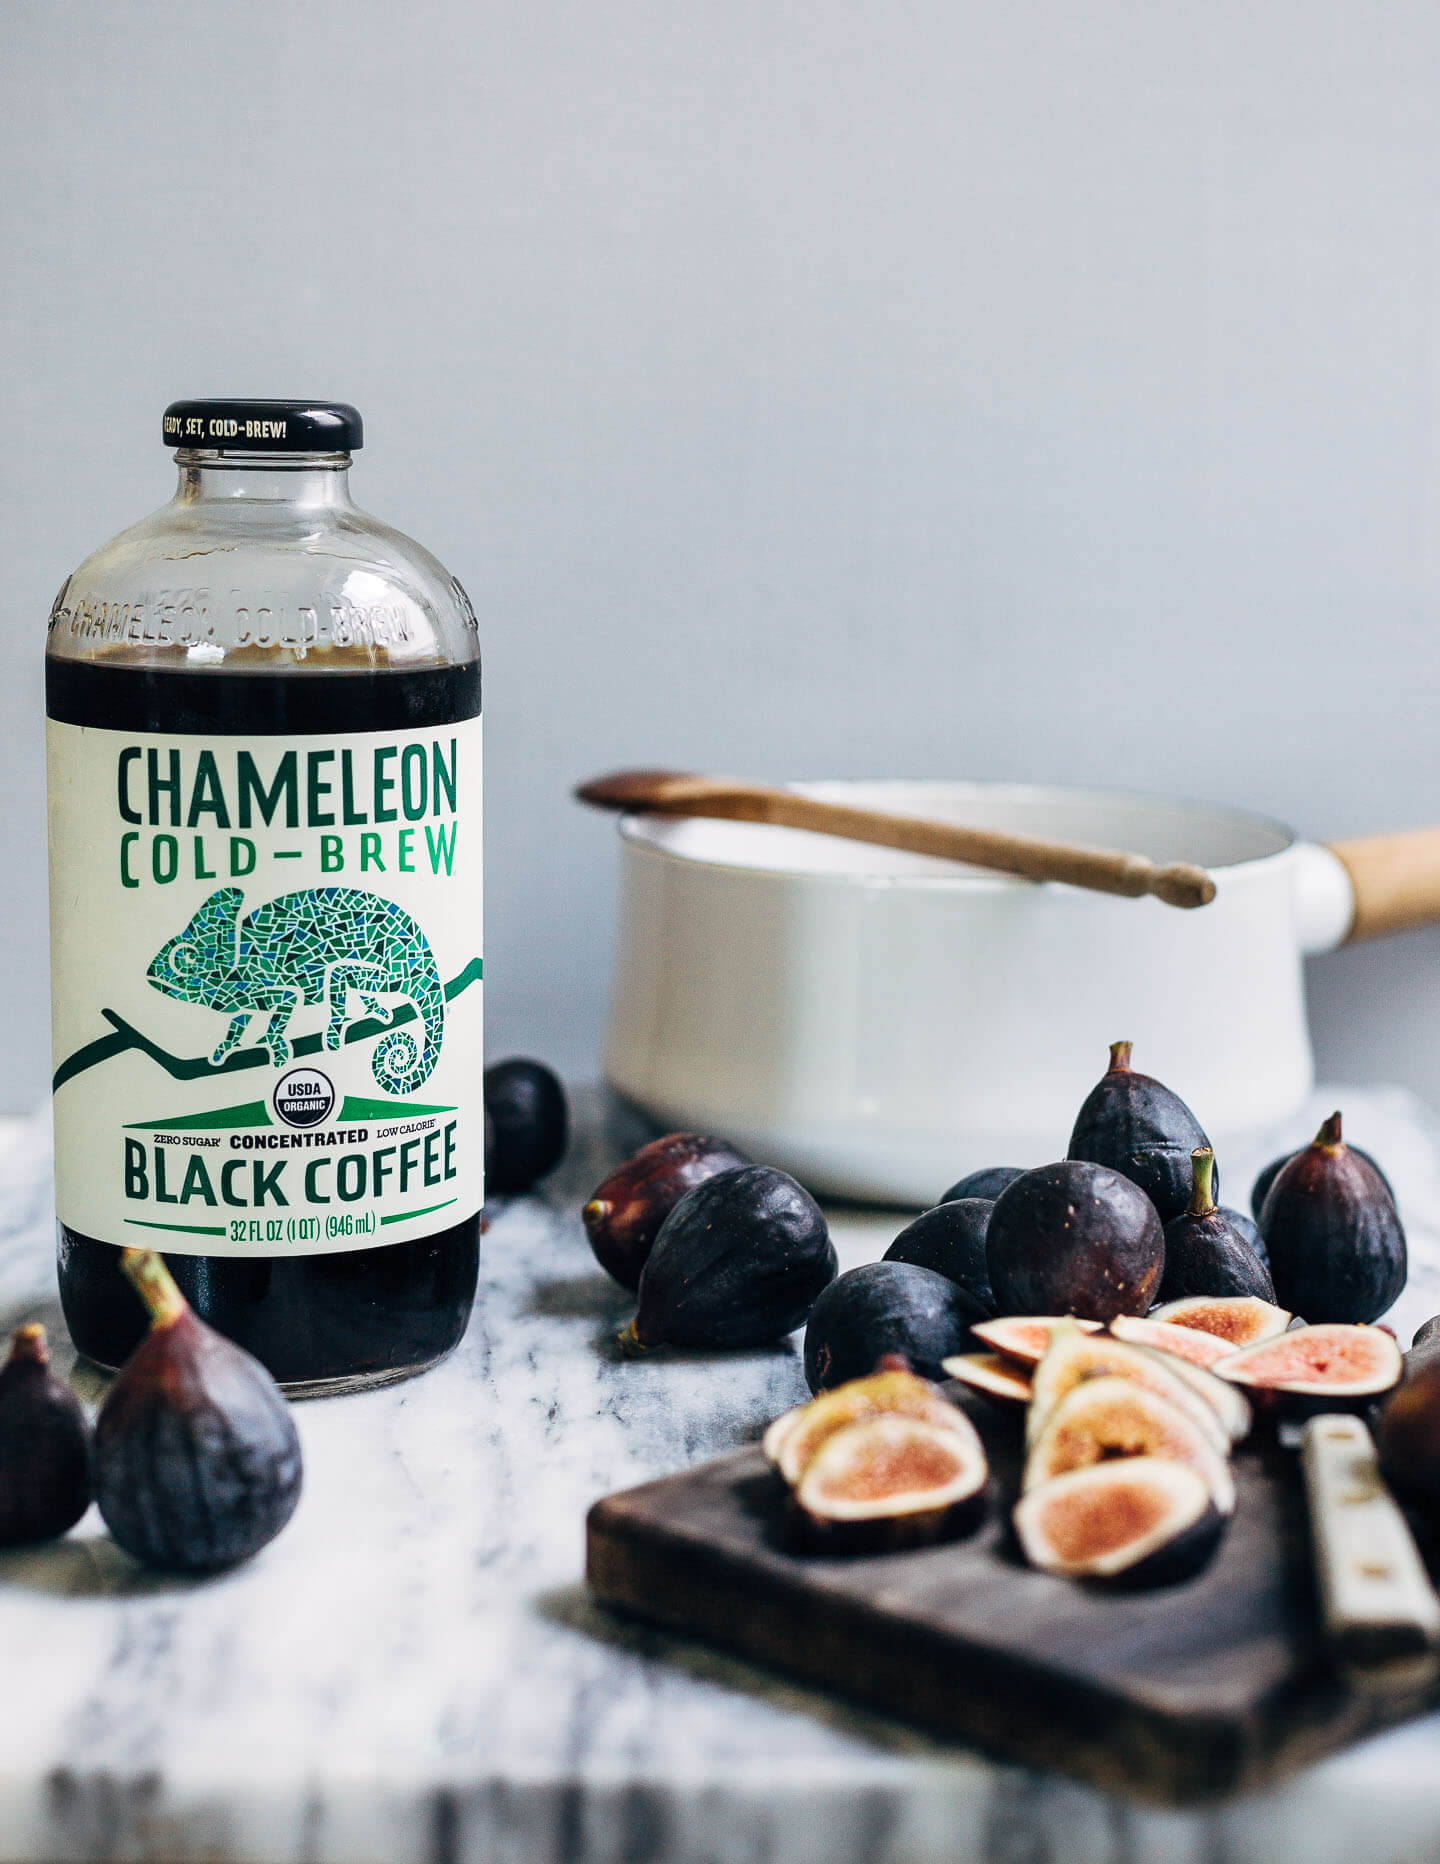 Made with concentrated cold brew coffee, black Mission figs, and vanilla ice cream, these boozy milkshakes make for a quick, sophisticated dessert. 